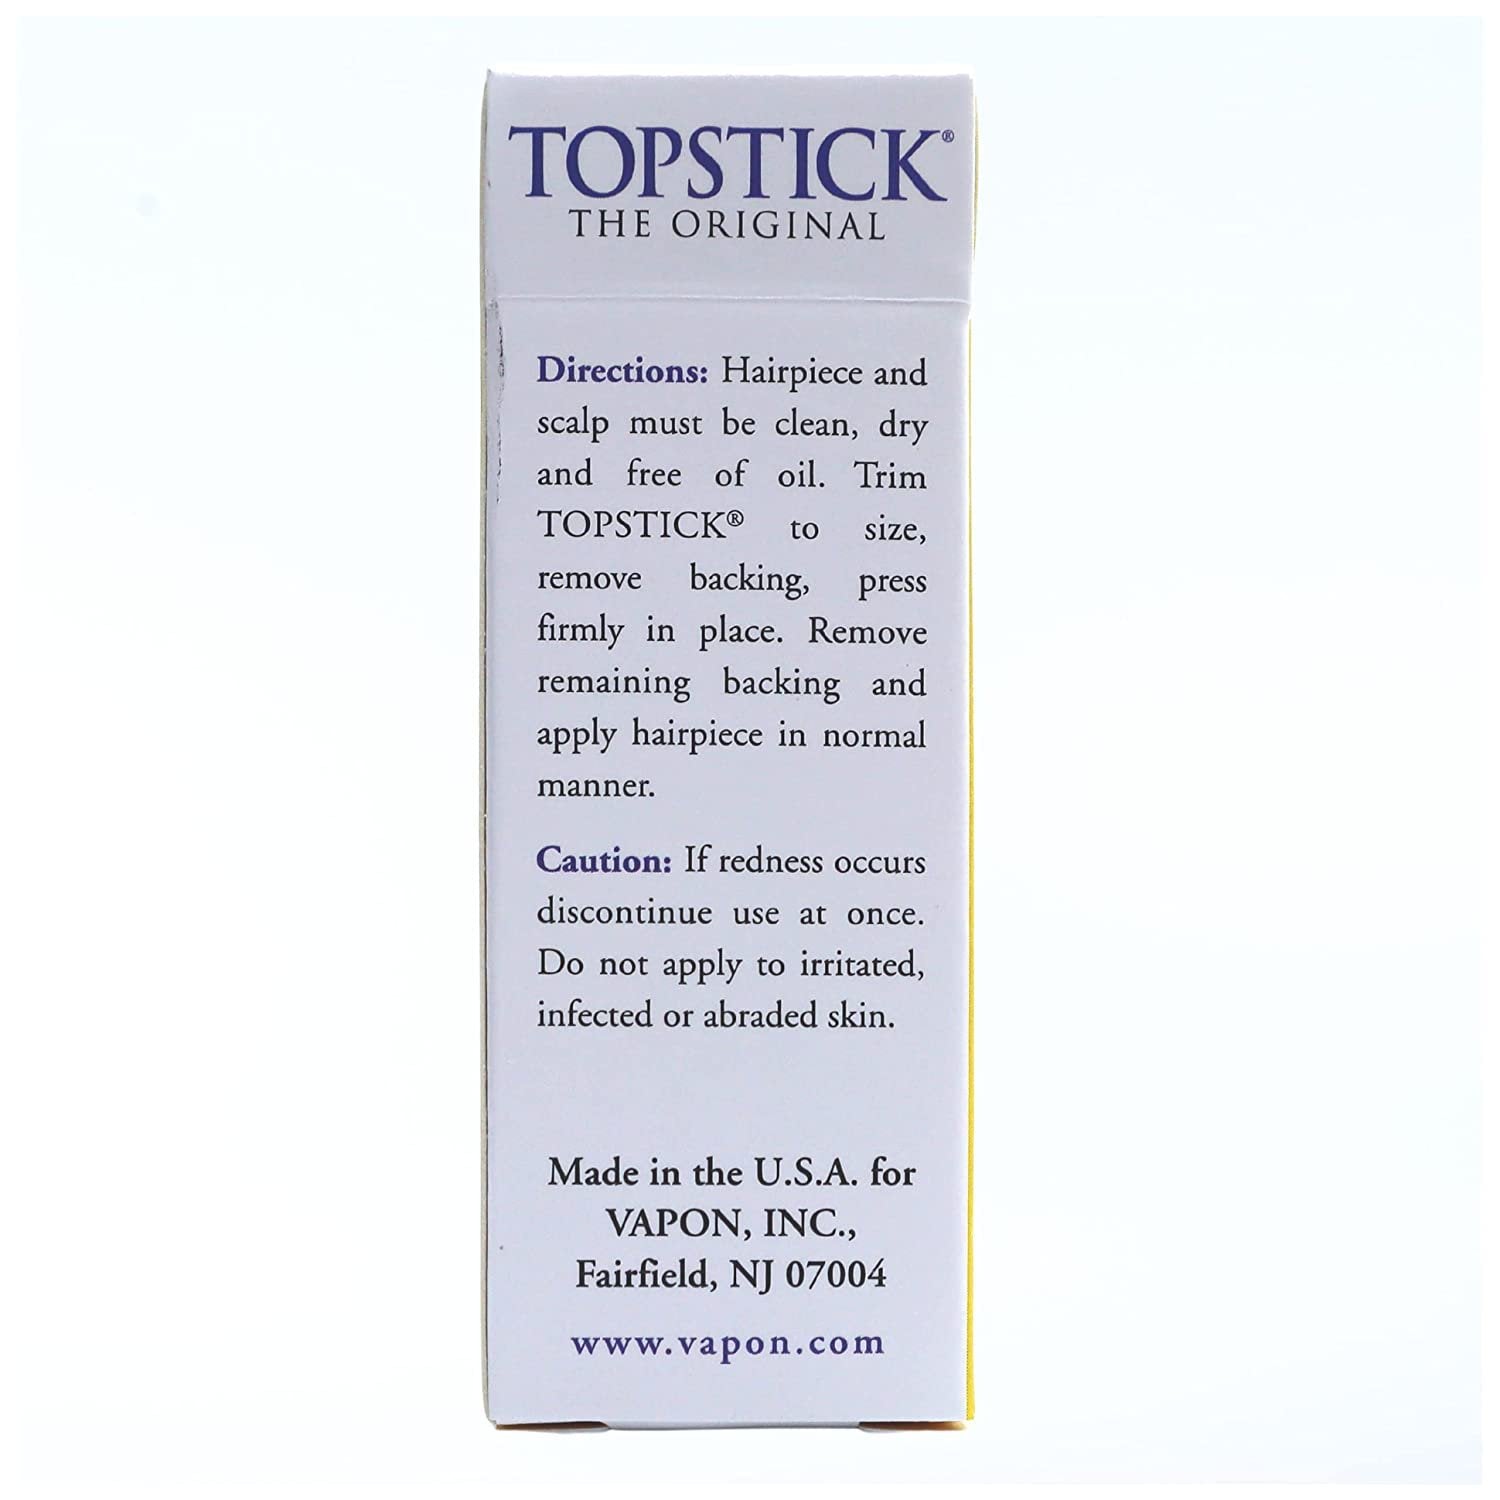 Vapon Topstick 1 X 3 - 50 Strips in each box (2 boxes) Hypo-Allergenic  All Purpose Clear Double Tape